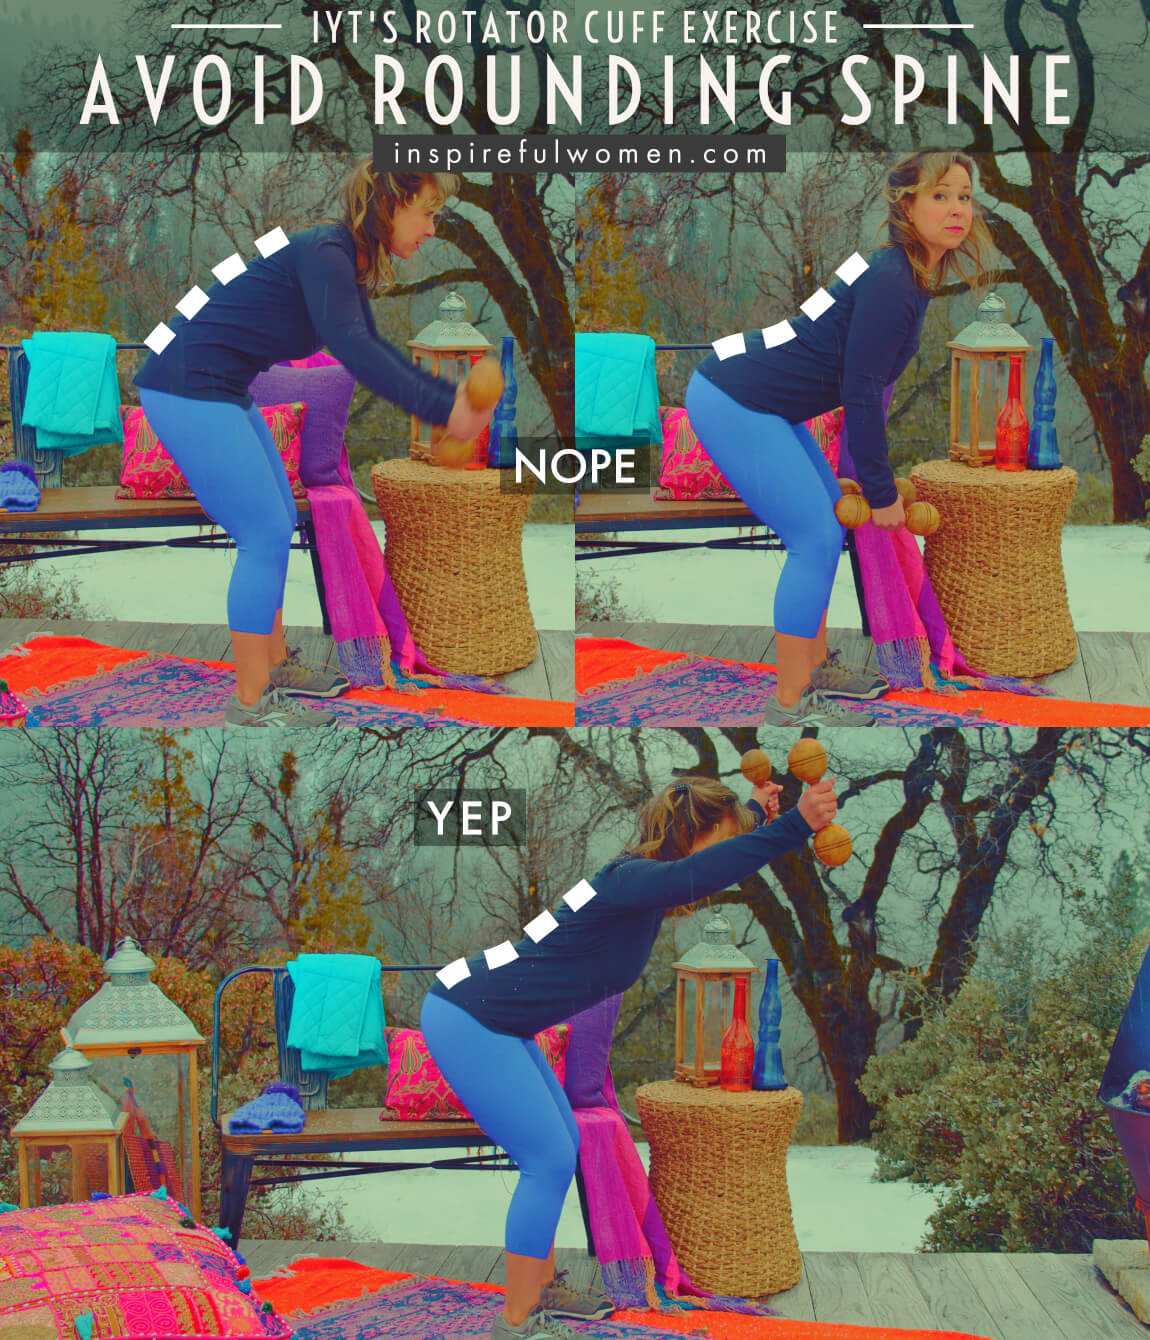 avoid-rounding-spine-iyts-rotator-cuff-shoulder-exercise-proper-form